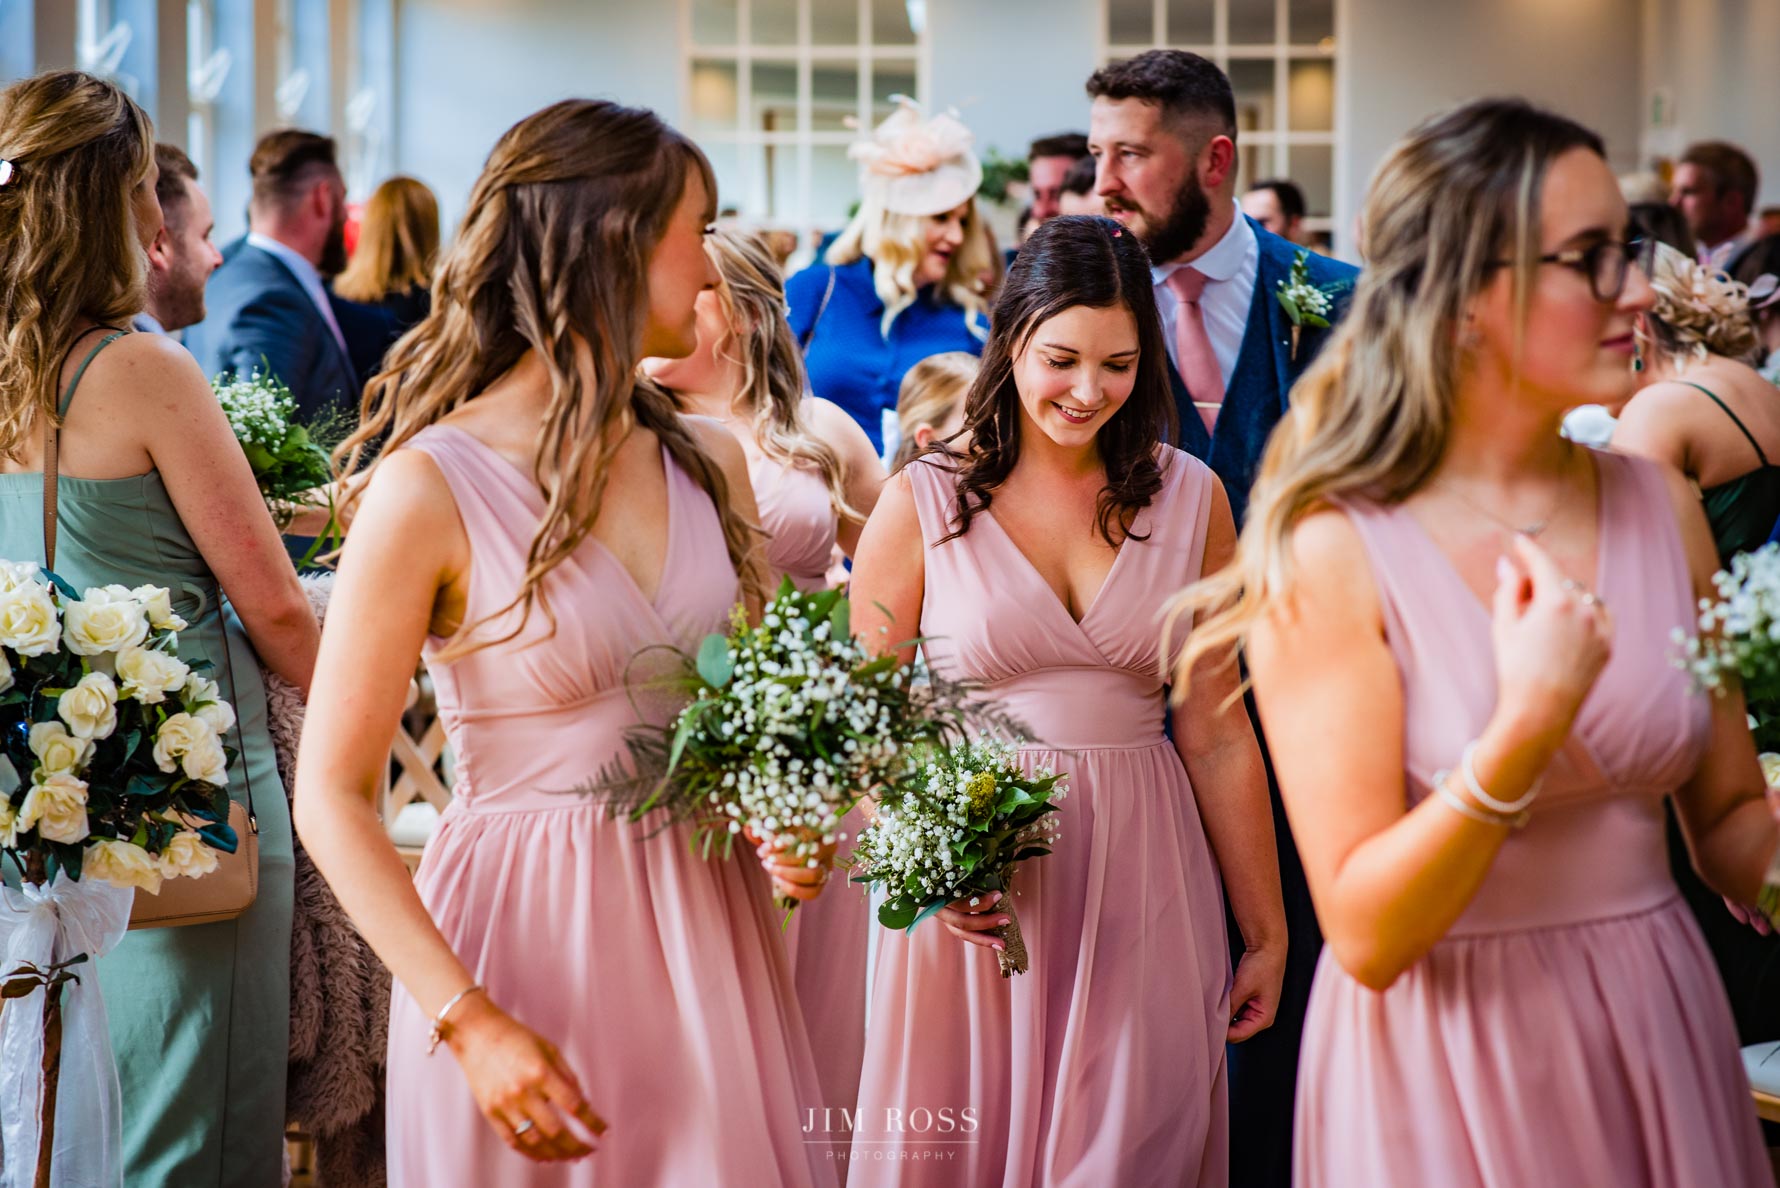 bridesmaids file out of bredenbury court wedding ceremony